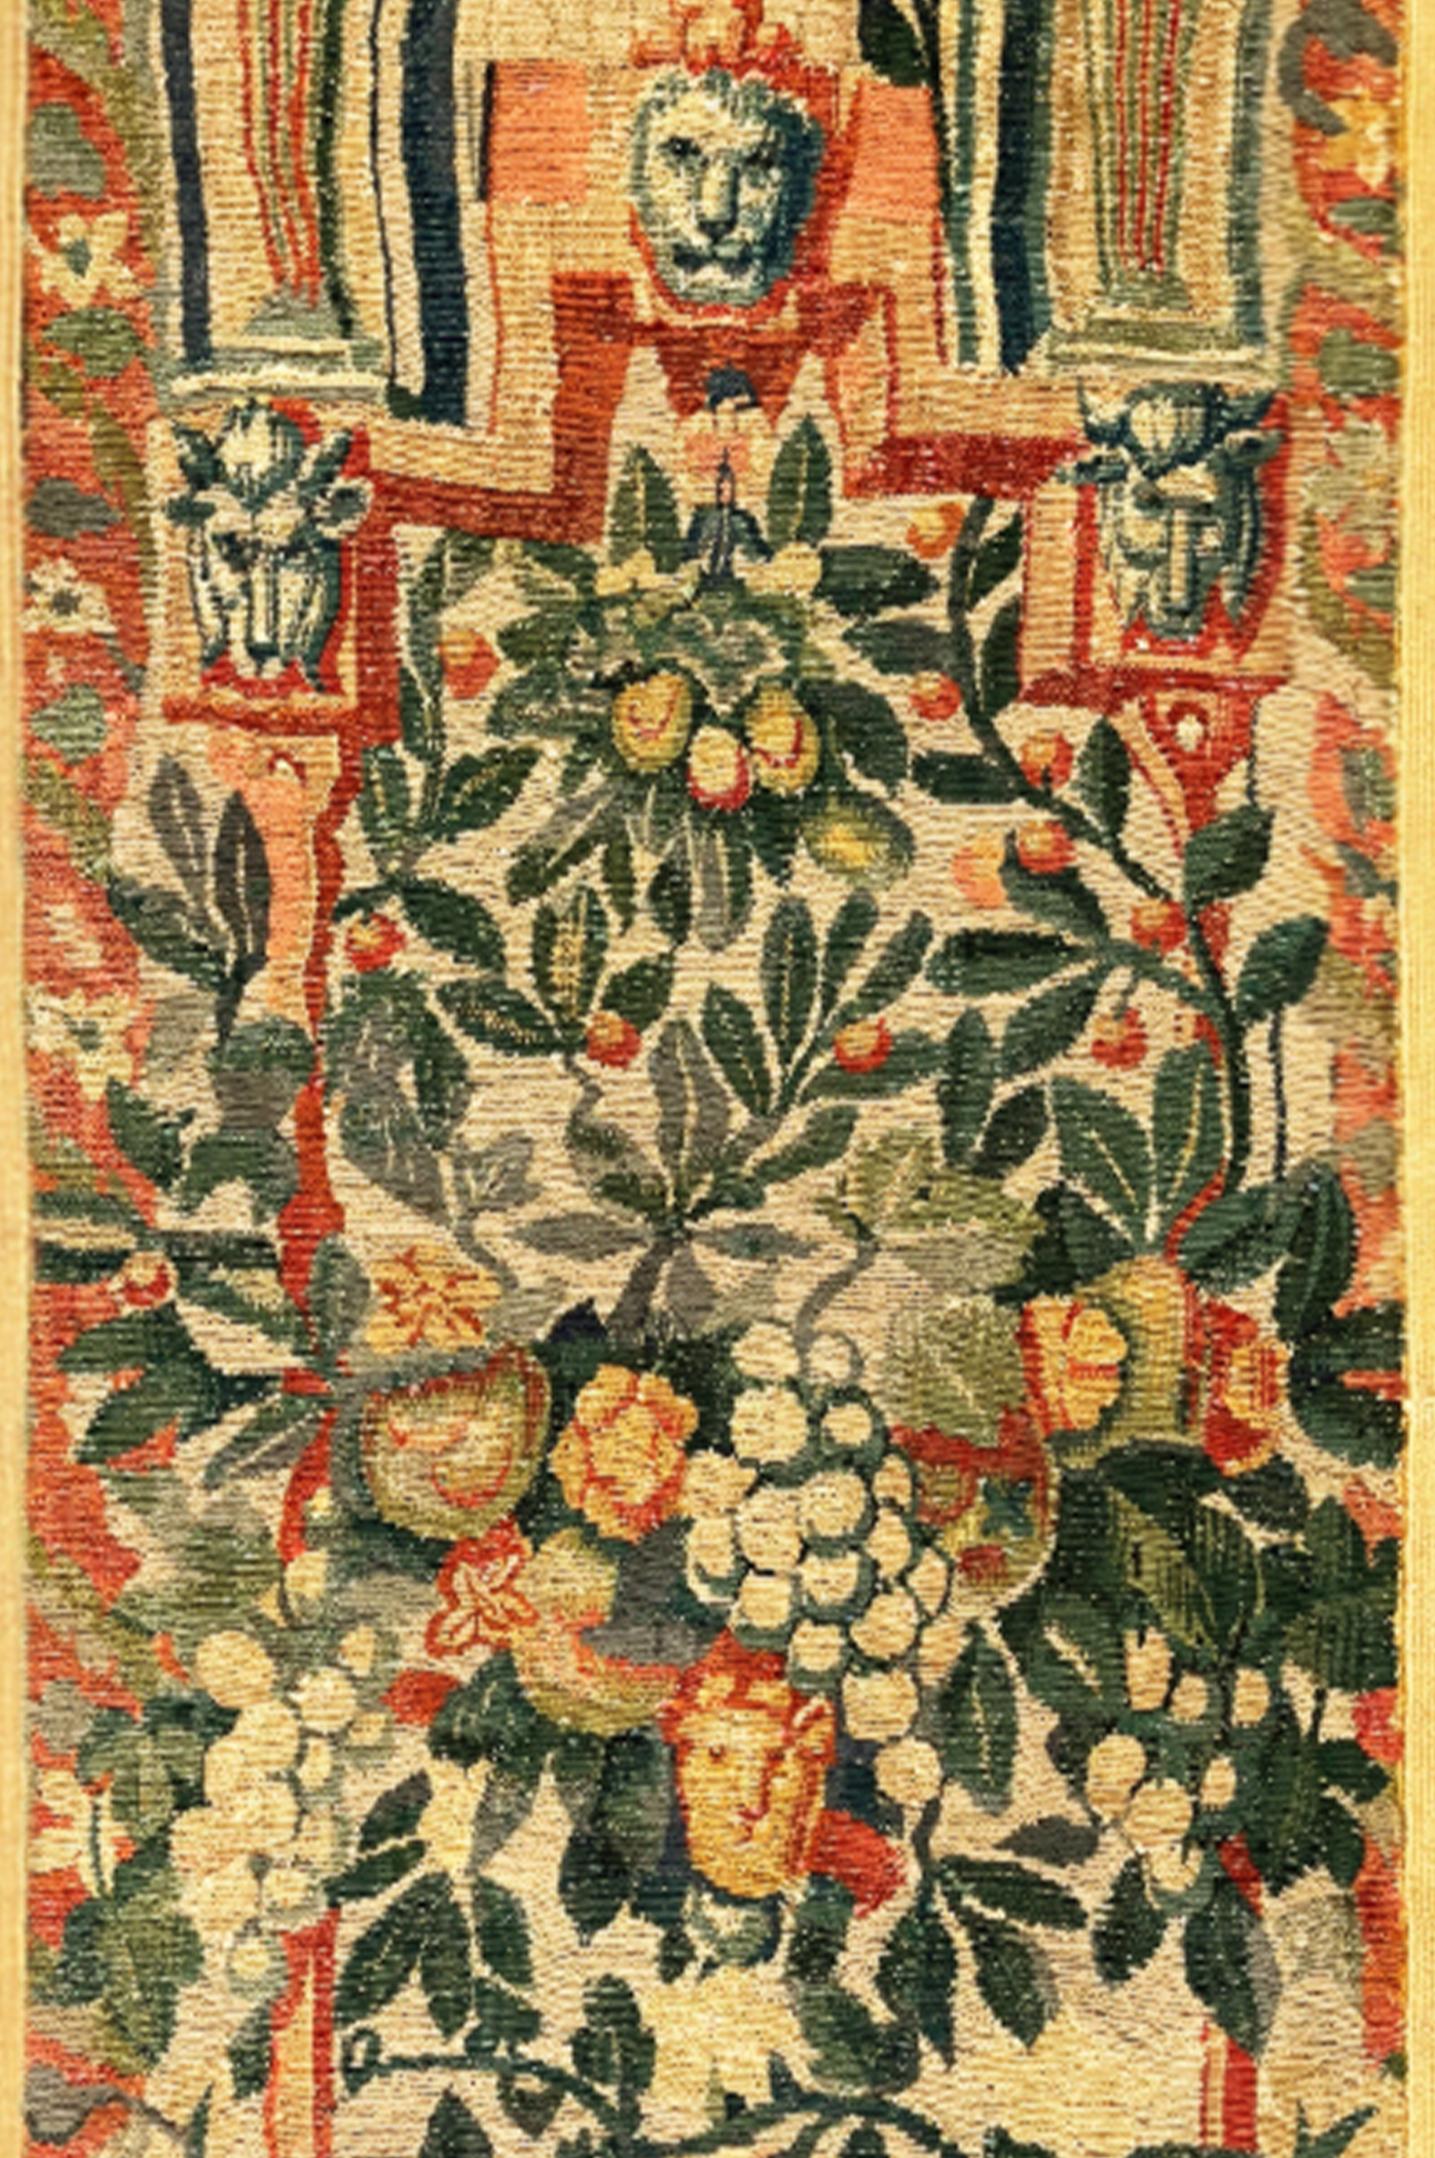 Pair of Late 16th Century Brussels Tapestry Panels, Vertical, w/ Women & Flowers For Sale 2